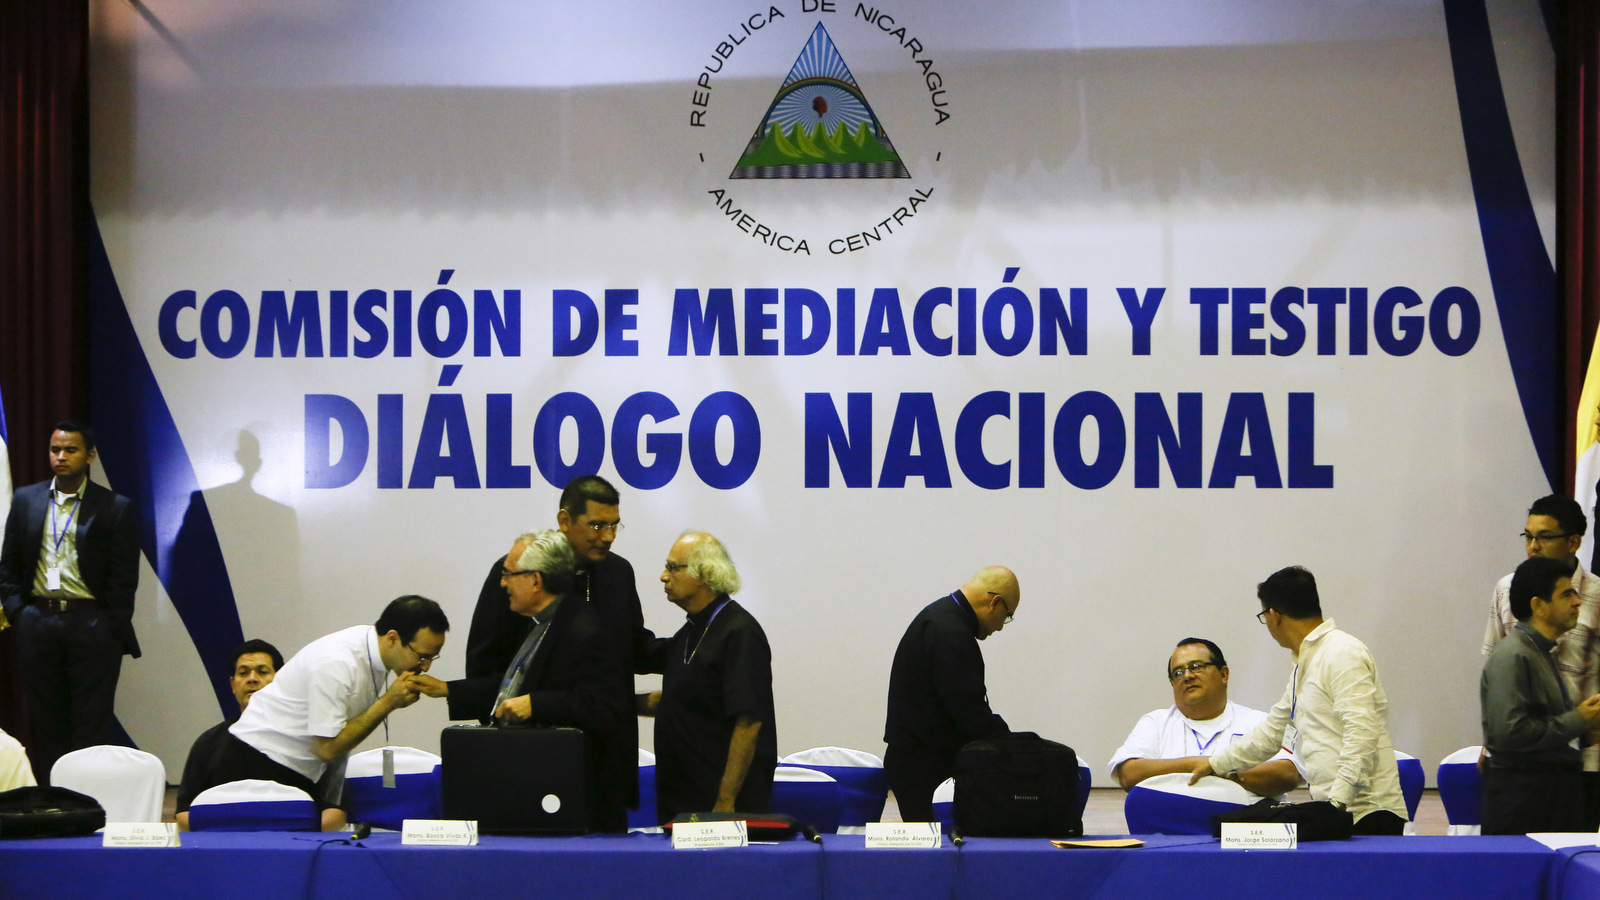 Representatives of the Catholic Church on the third day of the national dialogue in Managua, Nicaragua, May 21, 2018. The government of Nicaraguan President Daniel Ortega violated human rights through the excessive use of force against street demonstrations, according to the preliminary observations of investigators from the Inter-American Commission on Human Rights. (AP Photo/Alfredo Zuniga)